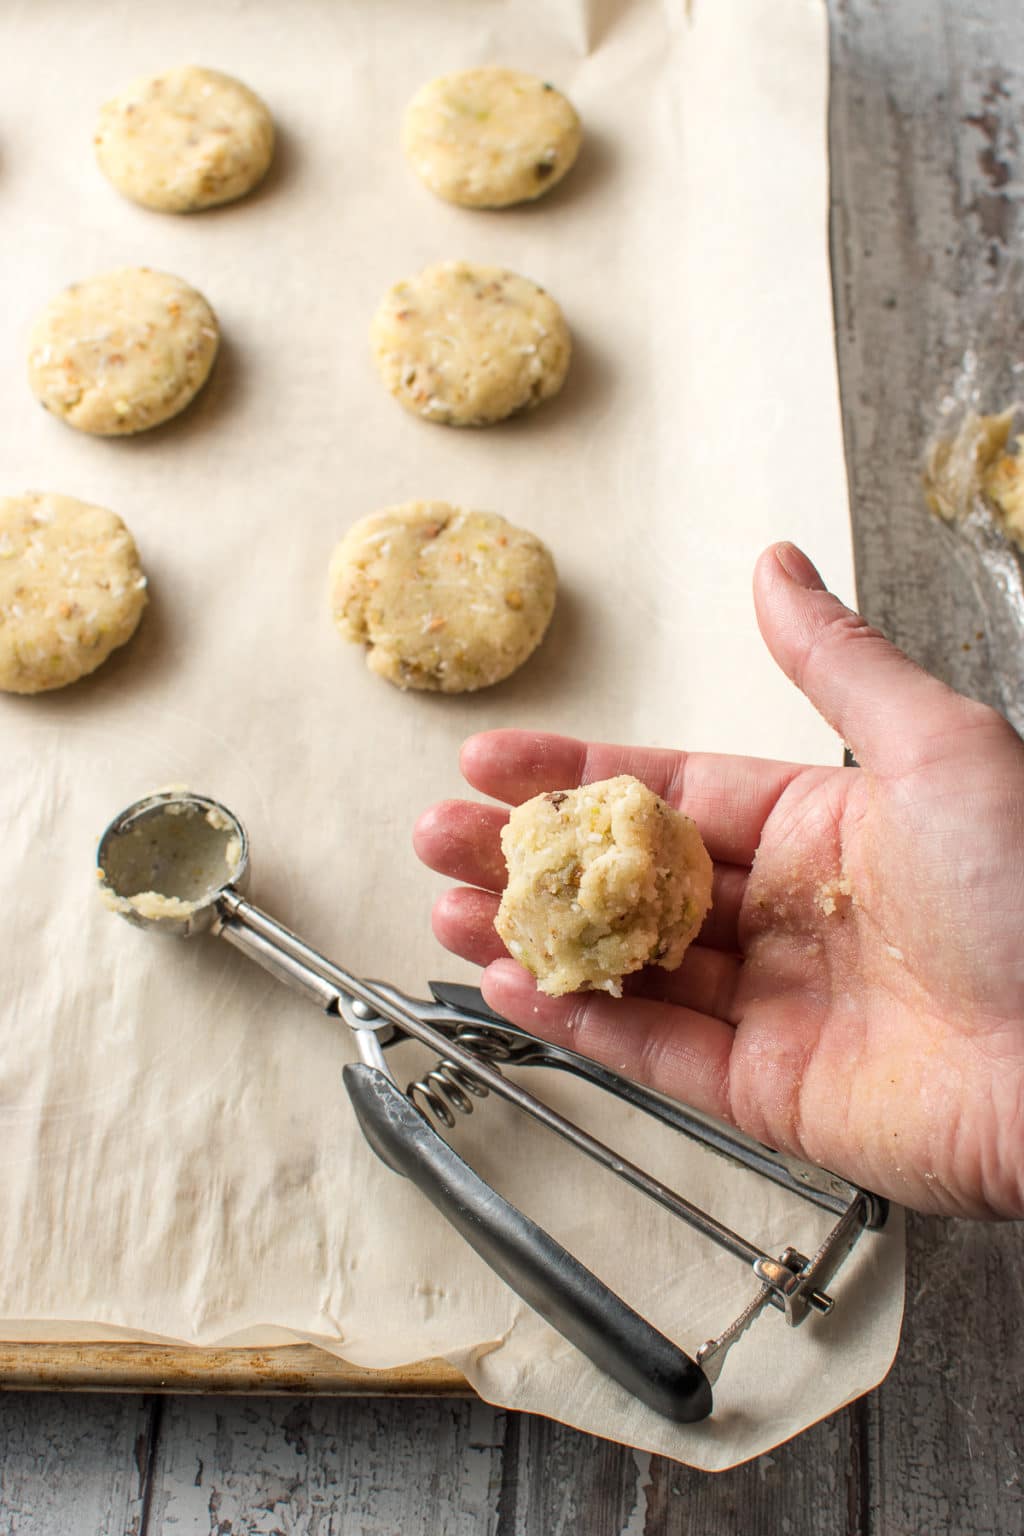 There are six, flattened balls of cookie dough spaced evenly on a piece of parchment paper. On the right, is a person's open hand, holding a ball of cookie dough. Resting on the parchment in the lower left, is an empty, stainless cookie scoop with a bit of cookie dough stuck to the inside of it.